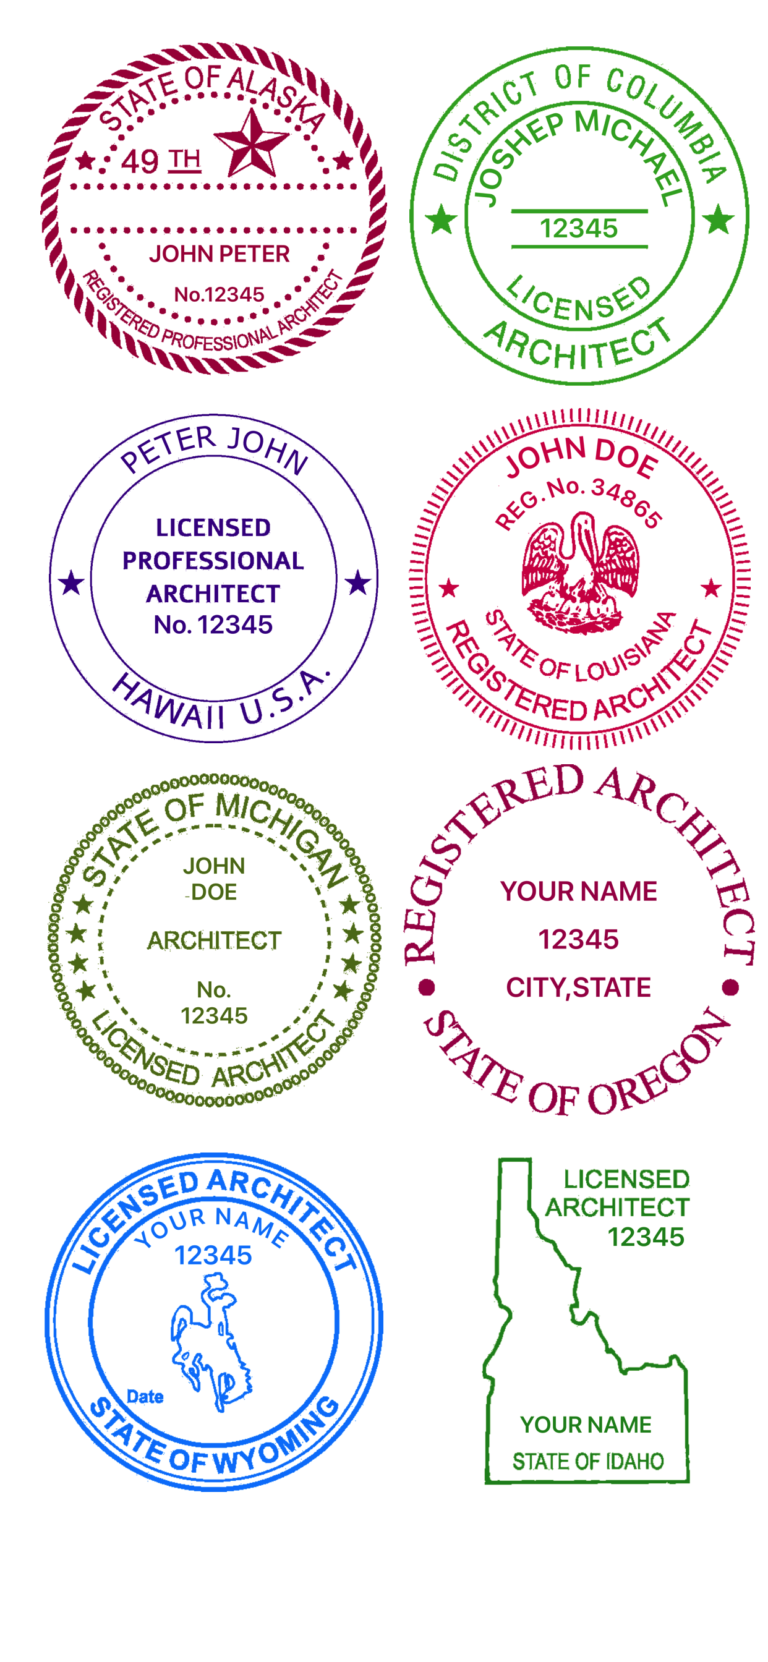 download-architect-seal-digital-company-seals-business-stamps